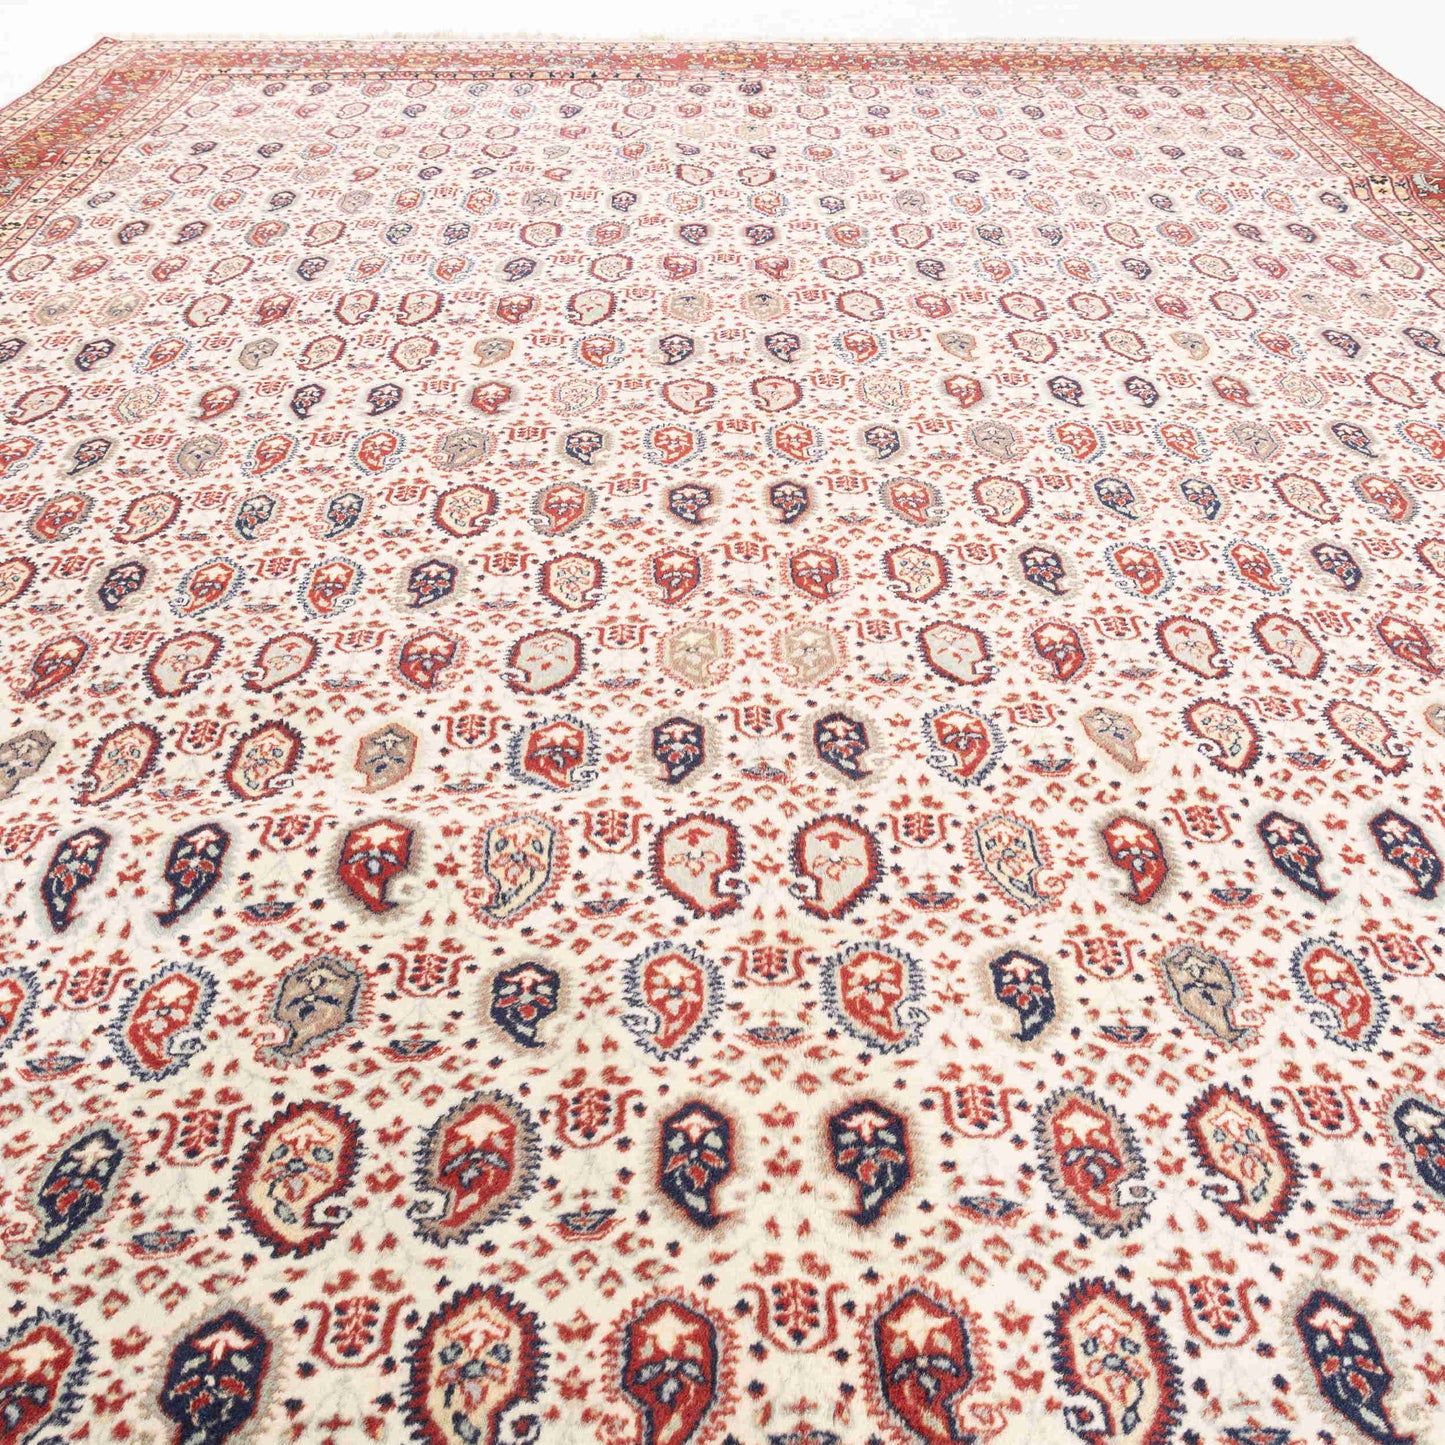 Oriental Rug Hereke Hand Knotted Wool On Cotton 227 X 320 Cm - 7' 6'' X 10' 6'' Red C014 ER23